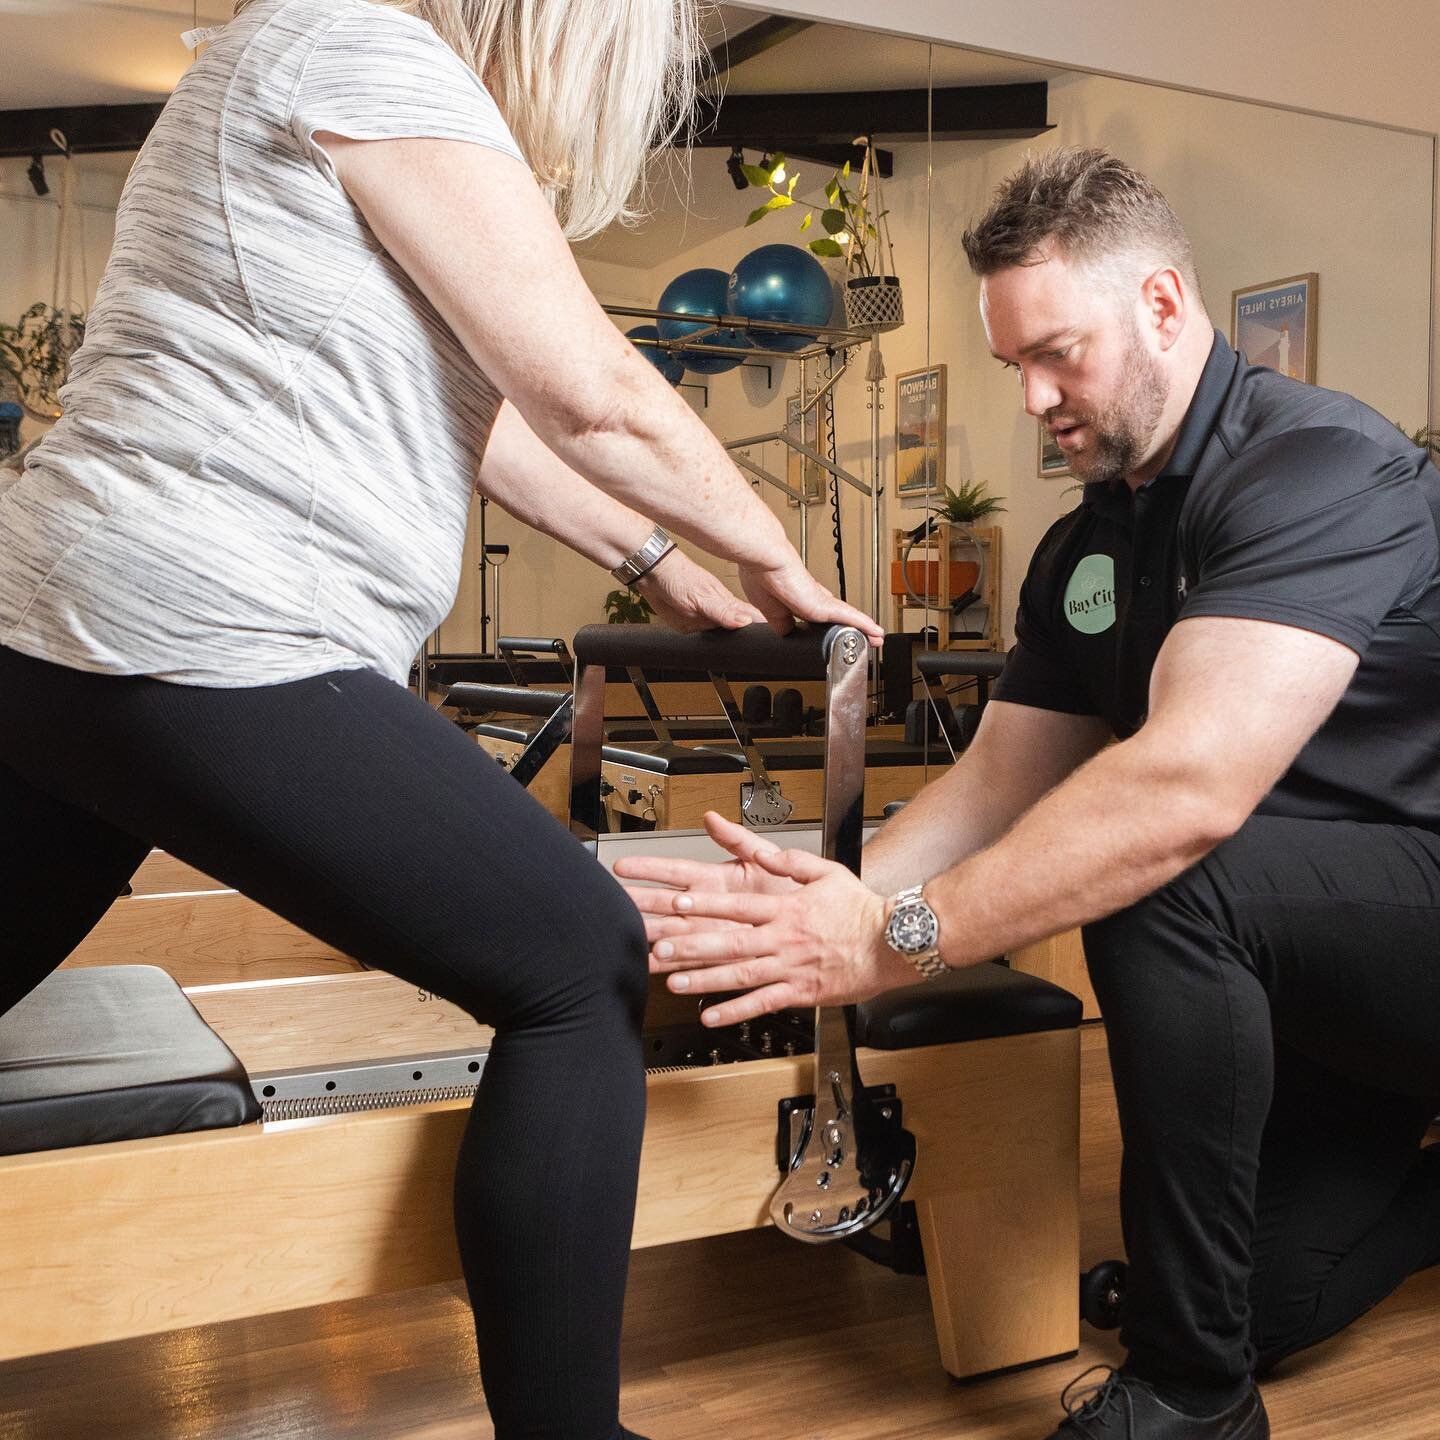 Our Senior Osteopath Clint keeping a watchful eye on knee positioning. One of the faulty movement patterns that occurs often in patients with knee pain is medial deviation - in other words where the knee drifts inwards due to weakness of the quad mus